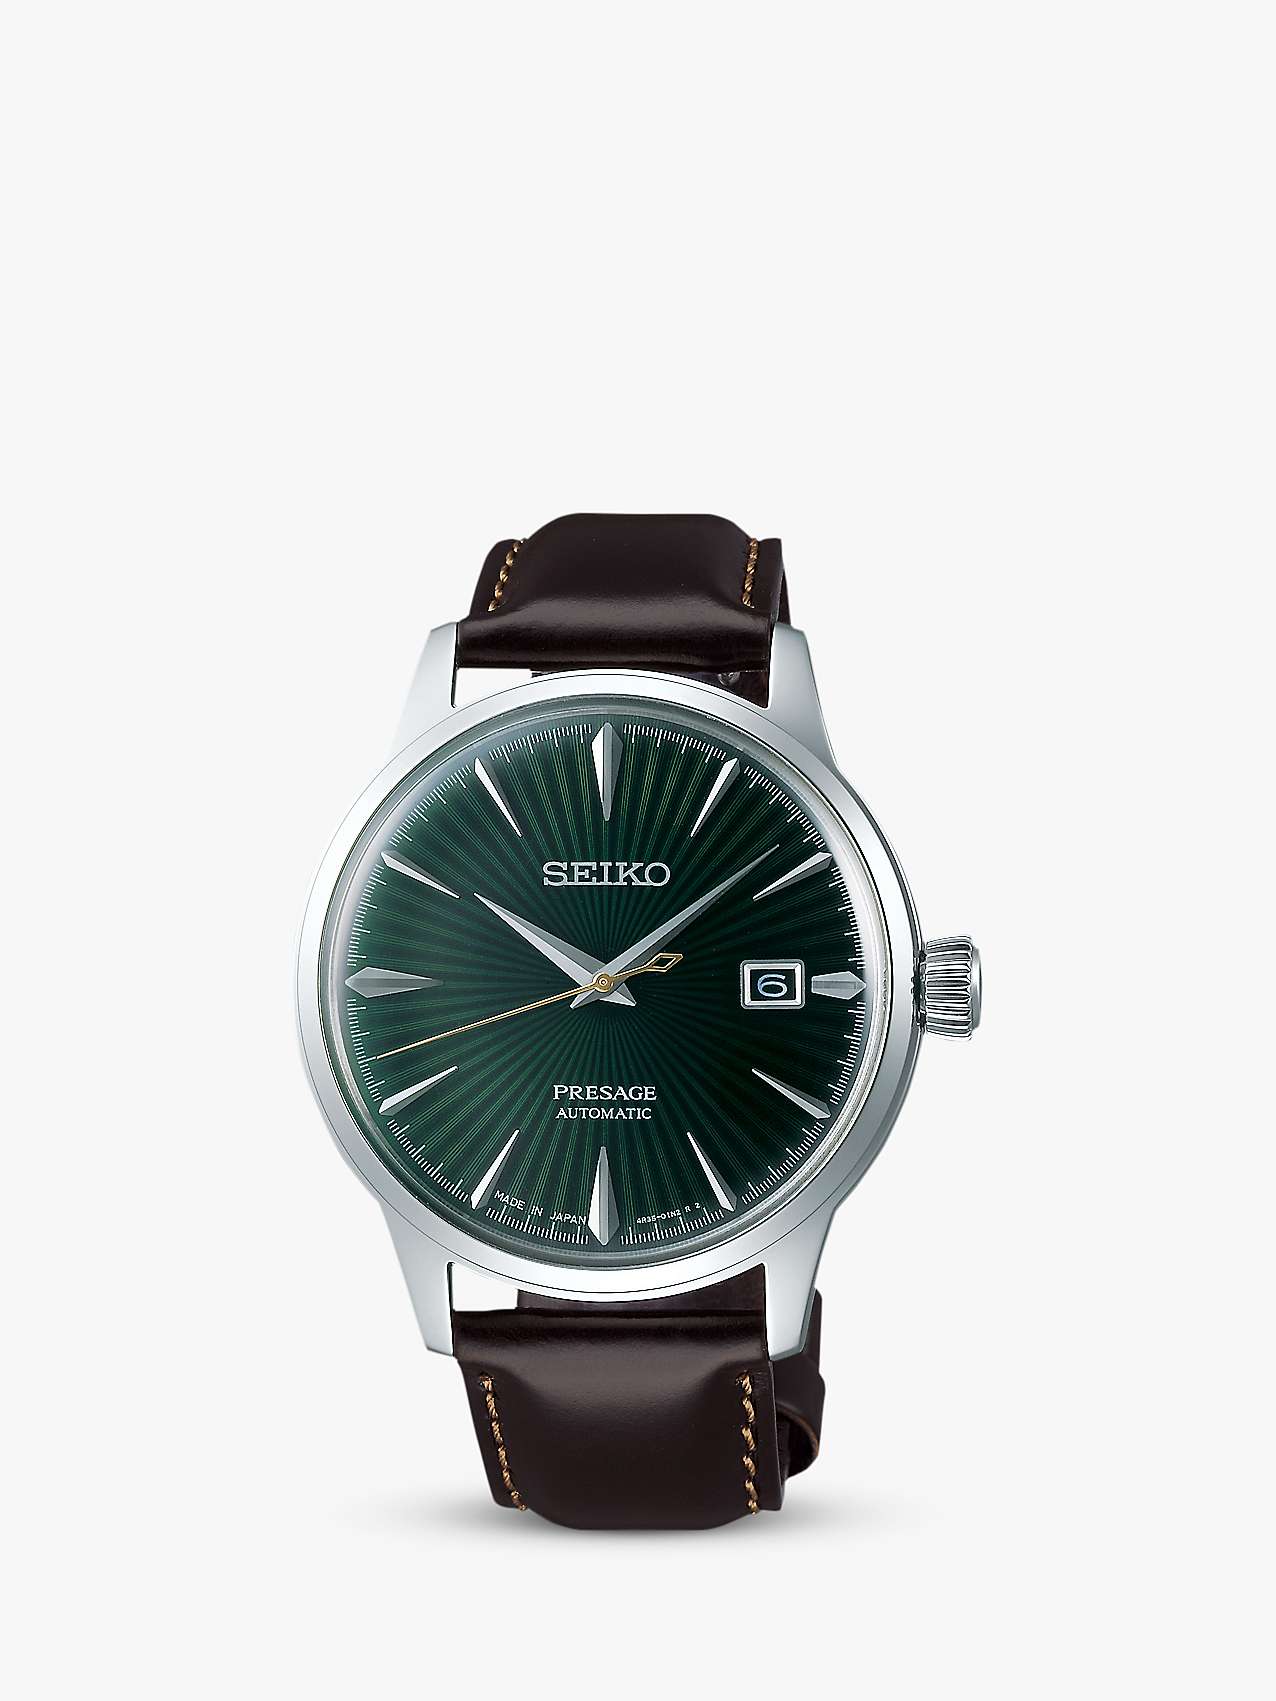 Buy Seiko SRPD37J1 Men's Presage Automatic Date Leather Strap Watch, Black/Green Online at johnlewis.com